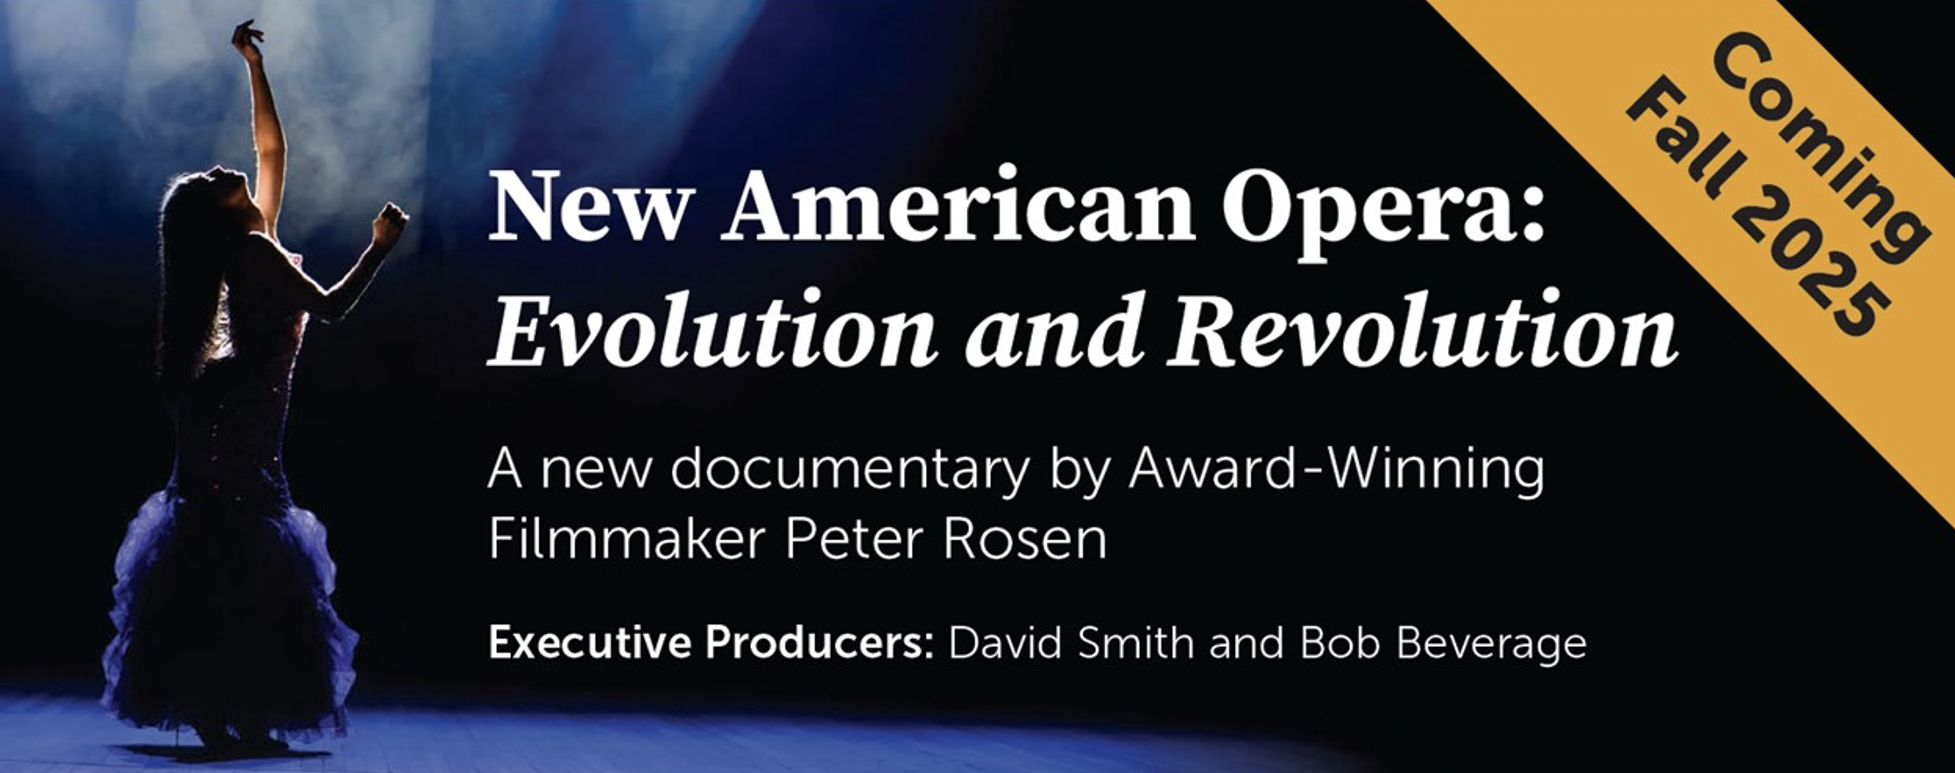 A woman on stage dancing with title text "New American Opera: Evolution and Revolution. A new documentary by Award-Winning Filmmaker Peter Rosen. Executive Producers: David Smith and Bob Beverage. Coming Fall 2025"